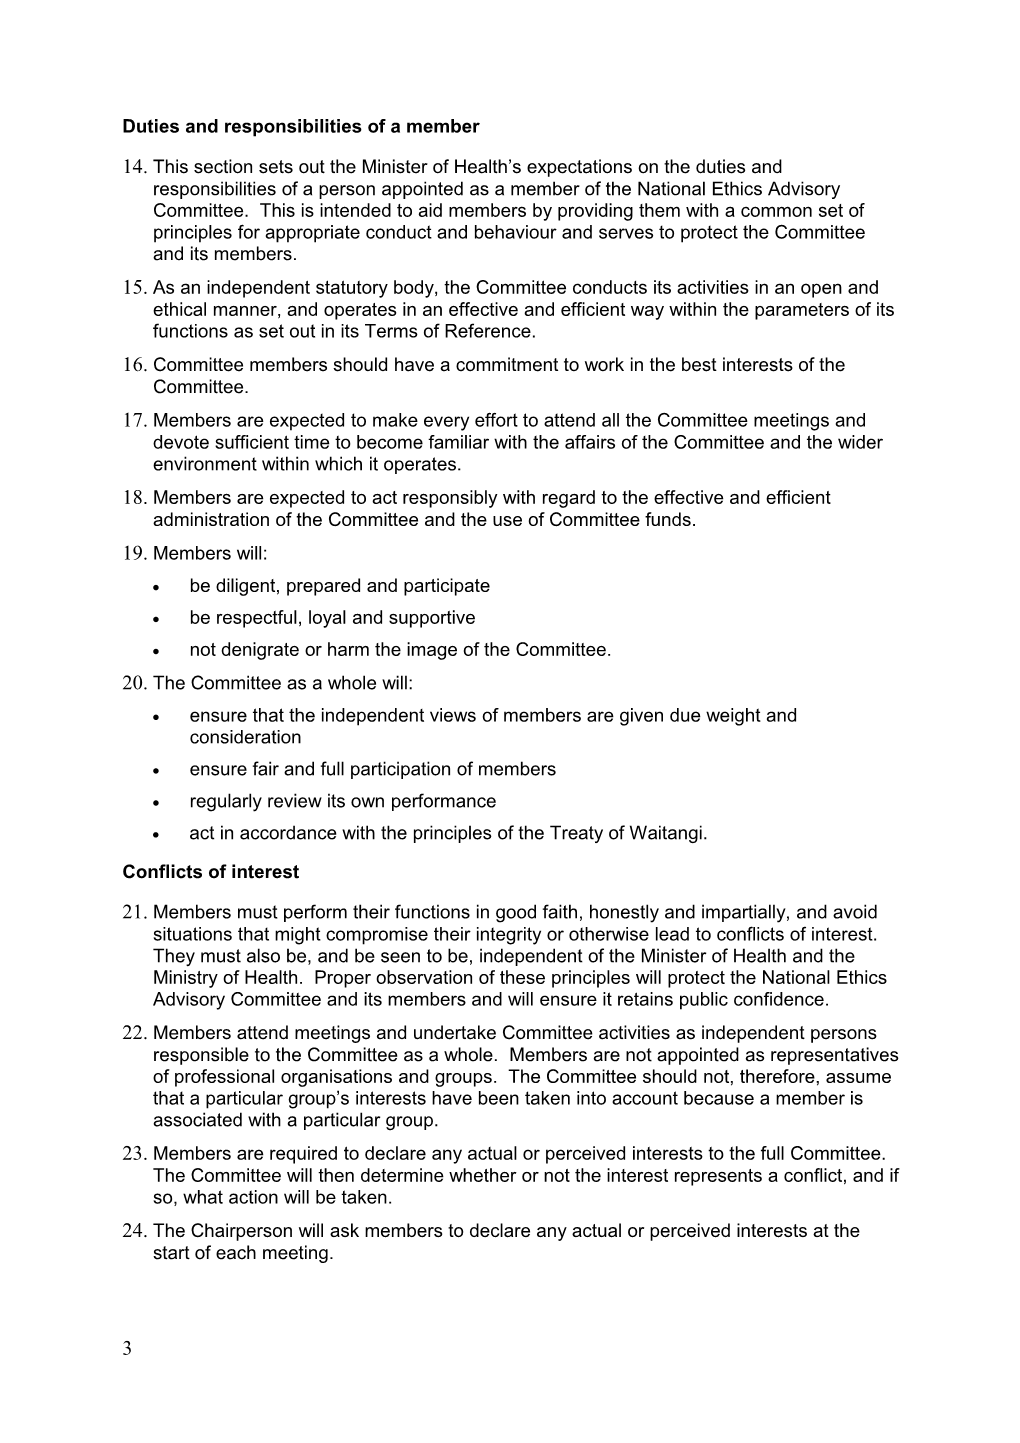 Terms of Reference for the National Ethics Advisory Committee